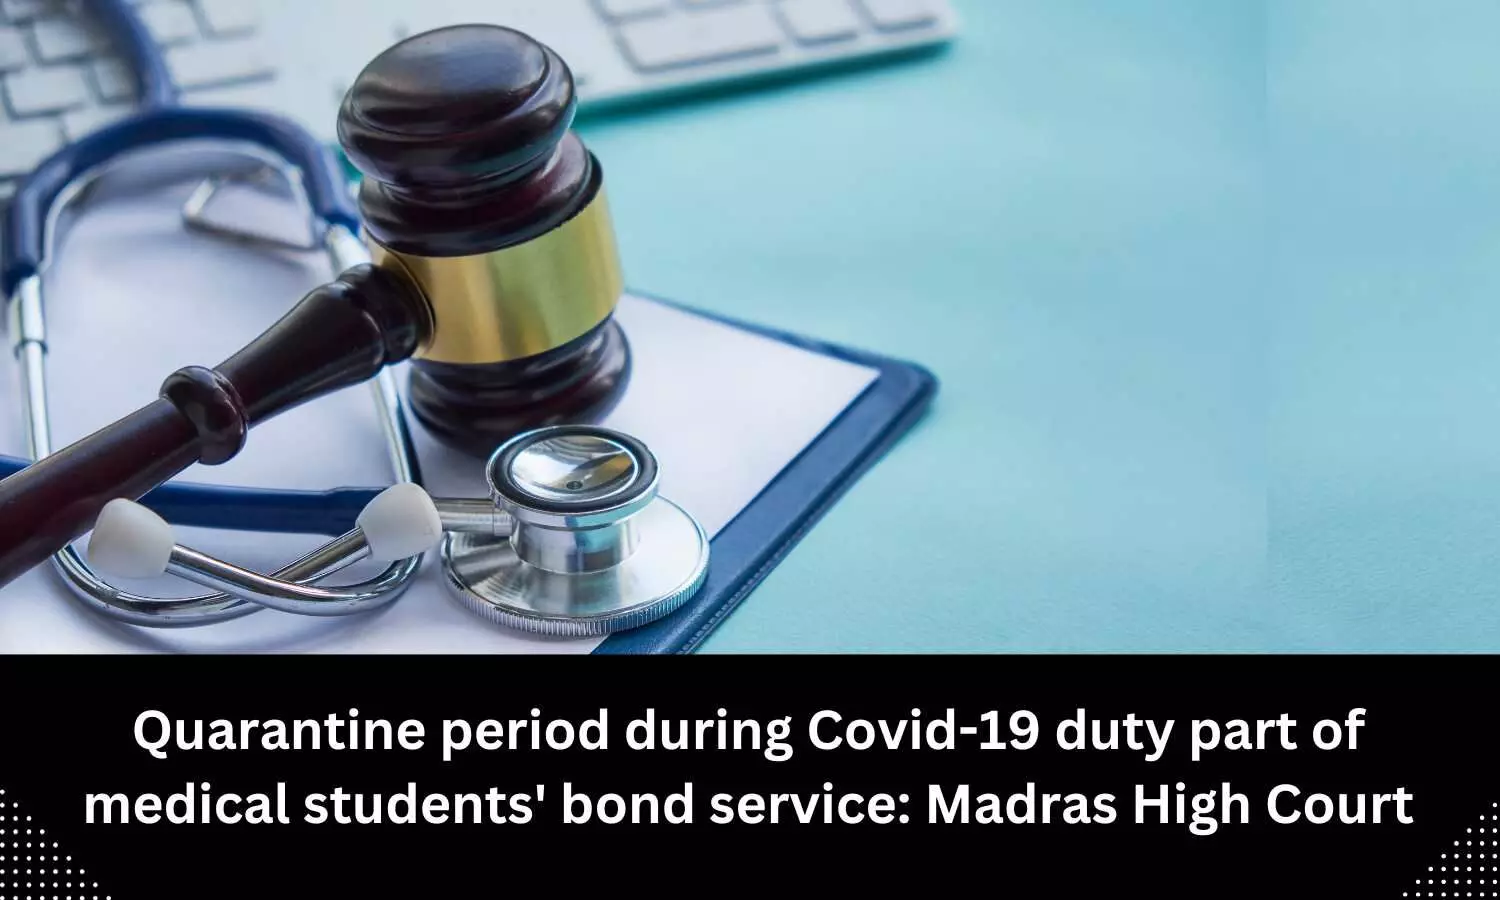 Quarantine period during COVID duty part of medical students bond service: Madras HC